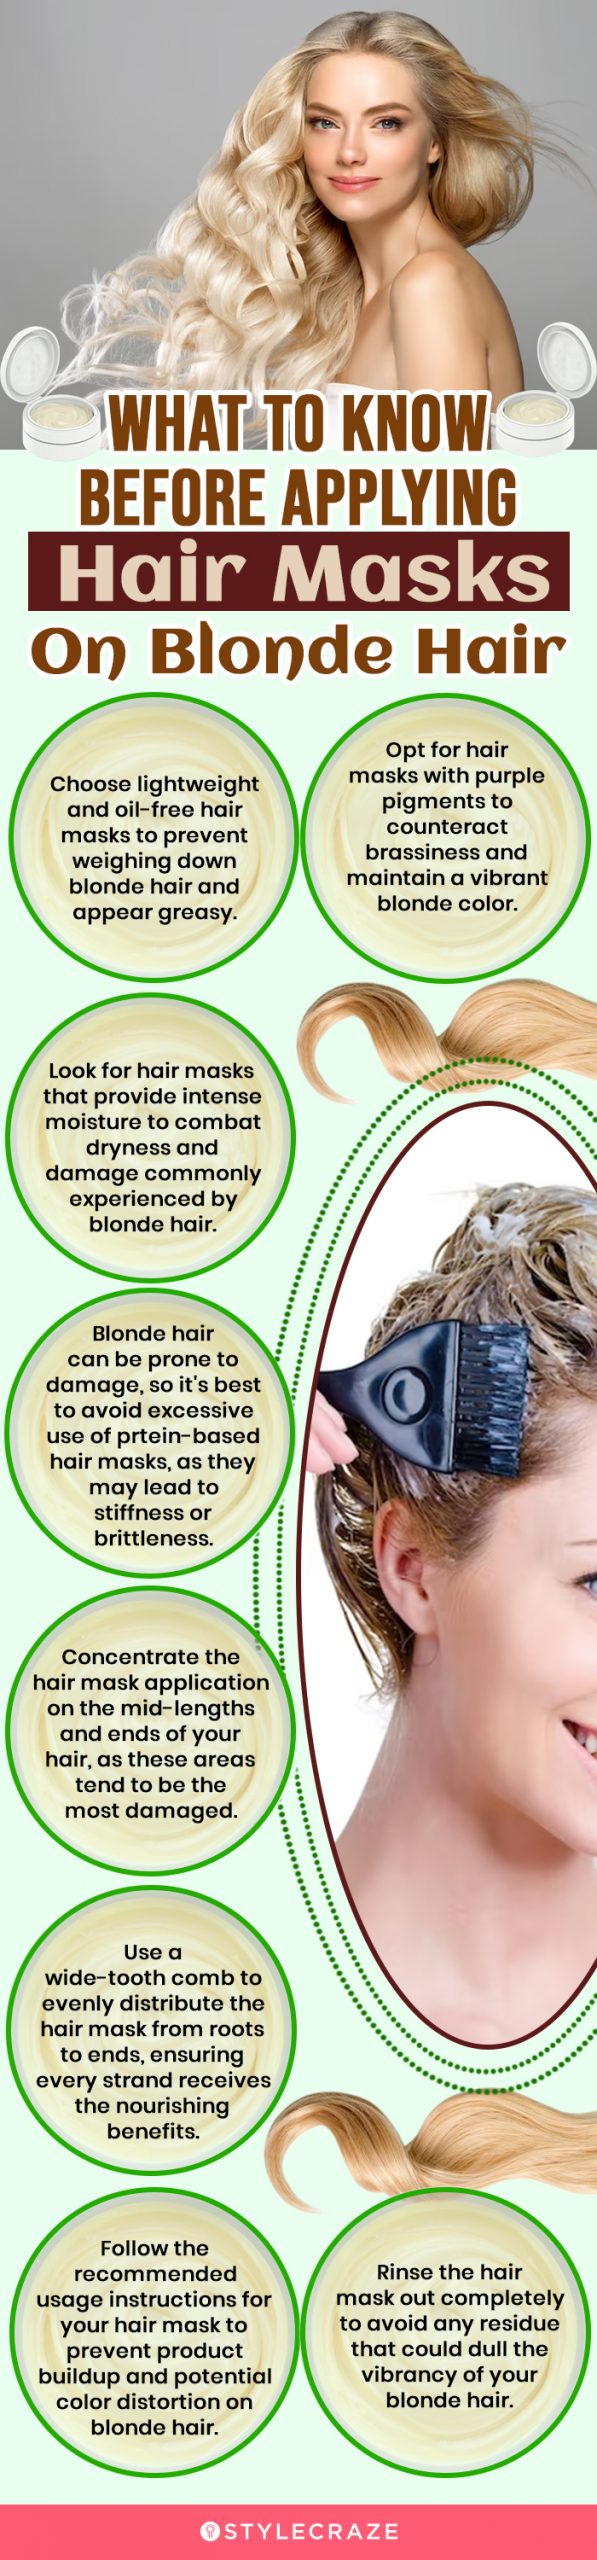 What To Know Before Applying Hair Masks On Blonde Hair (infographic)